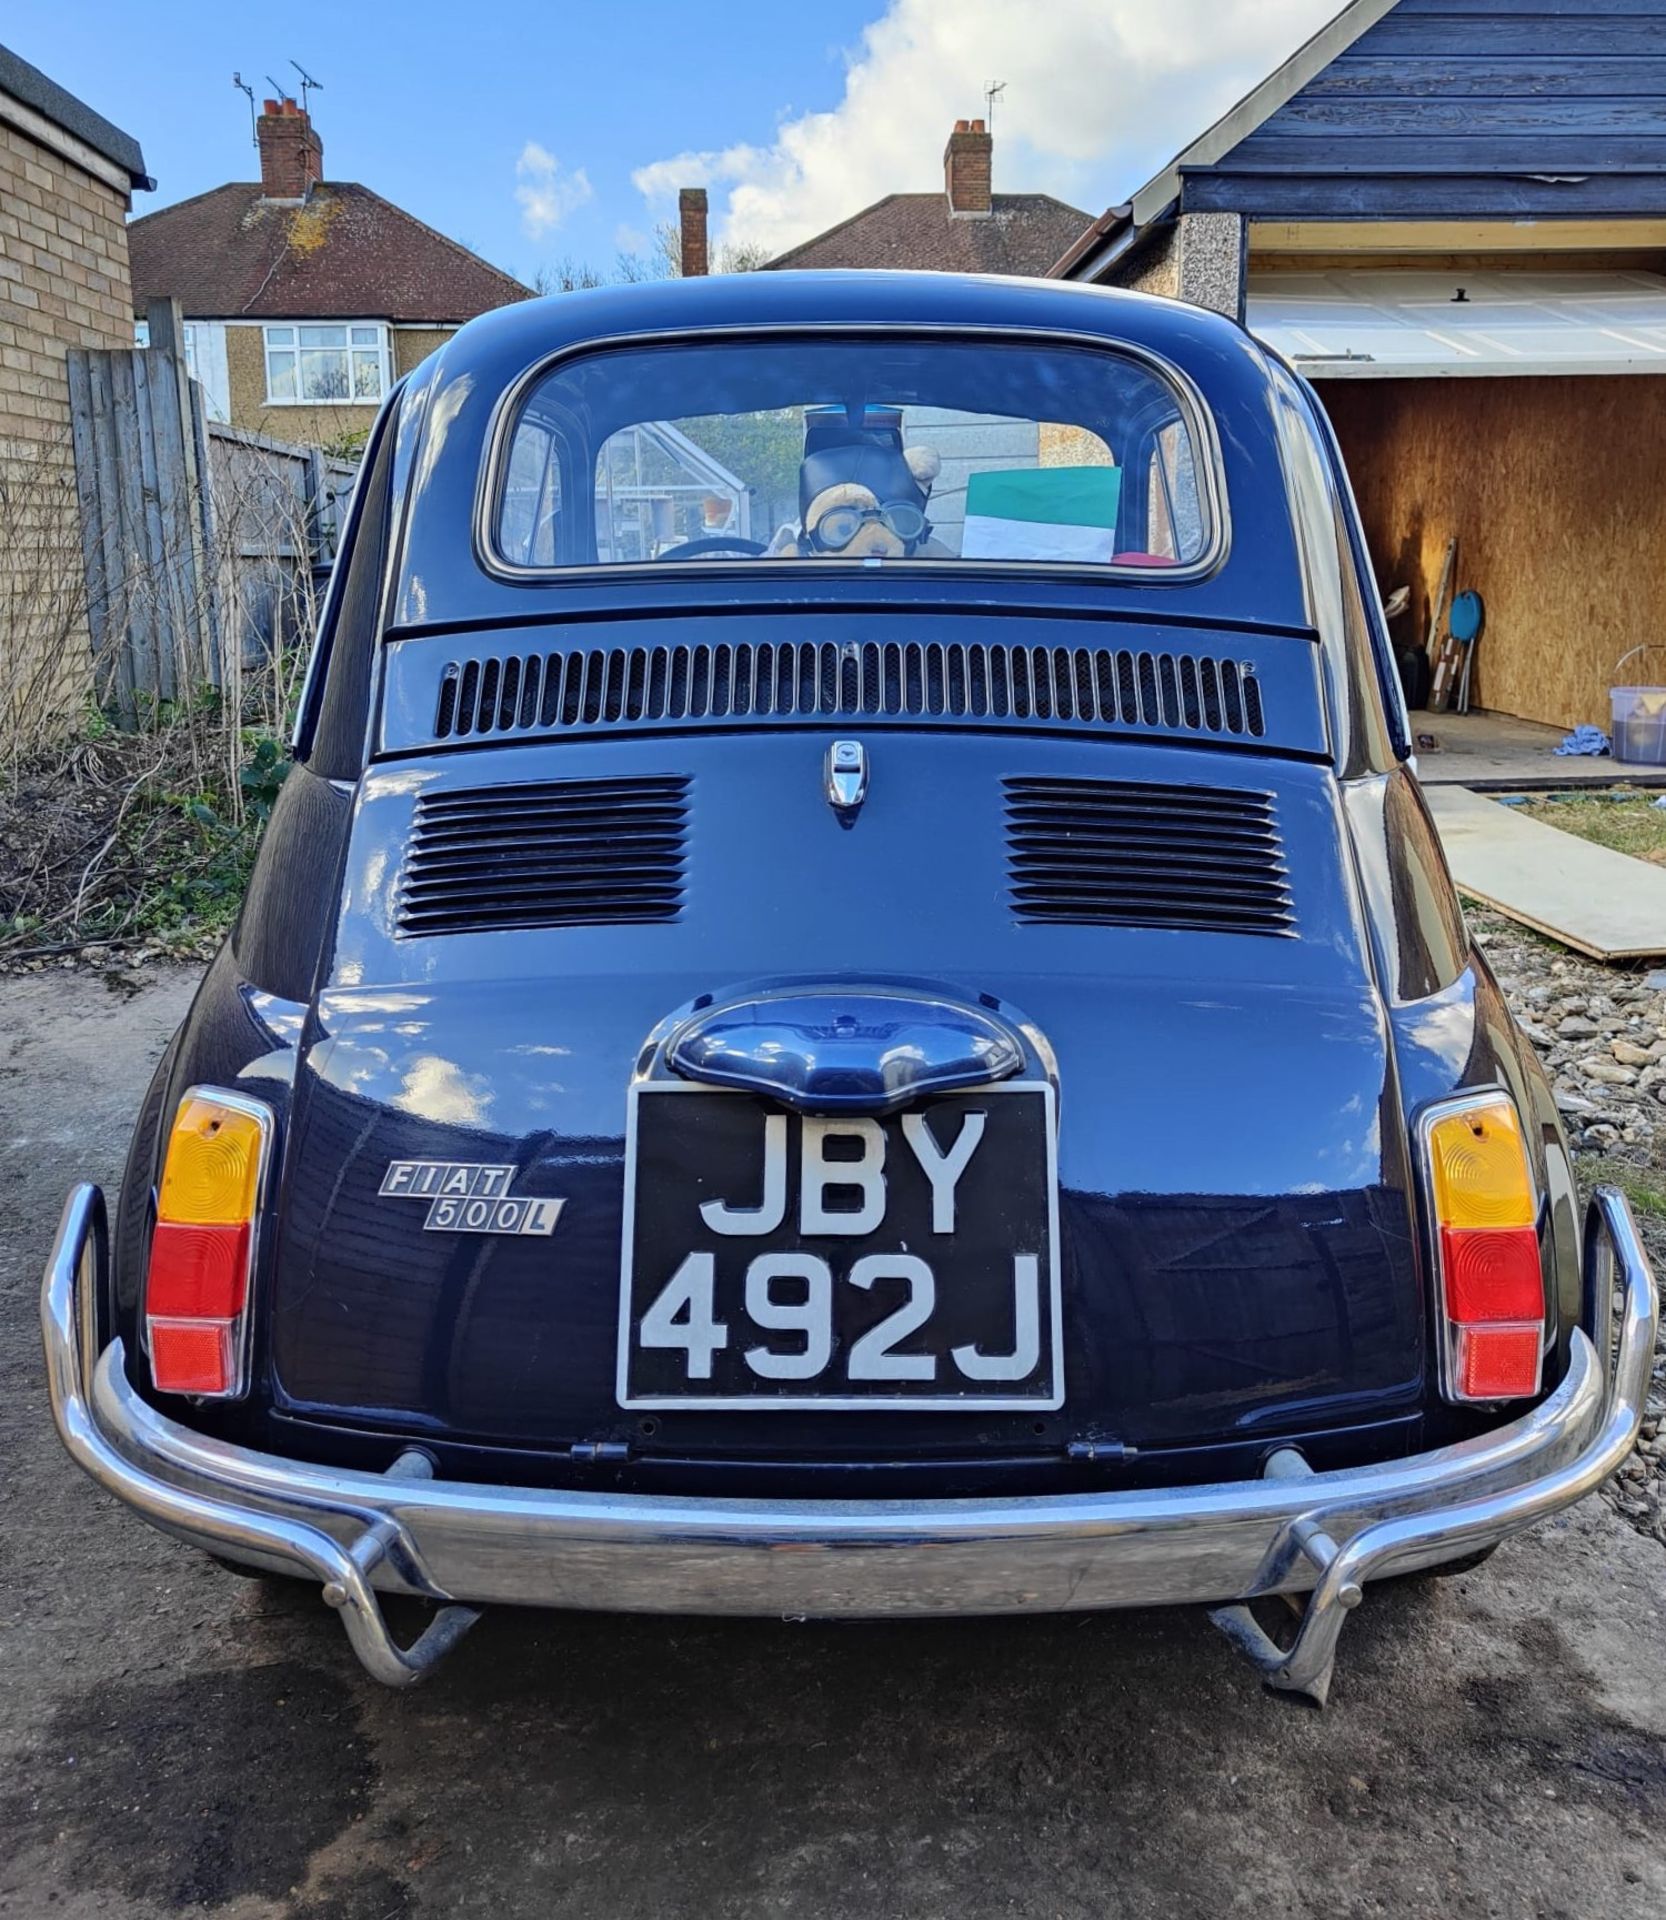 1971 FIAT 500L SALOON Registration Number: JBY 492J Chassis Number: TBA Recorded Mileage: 40,300 - Image 5 of 13